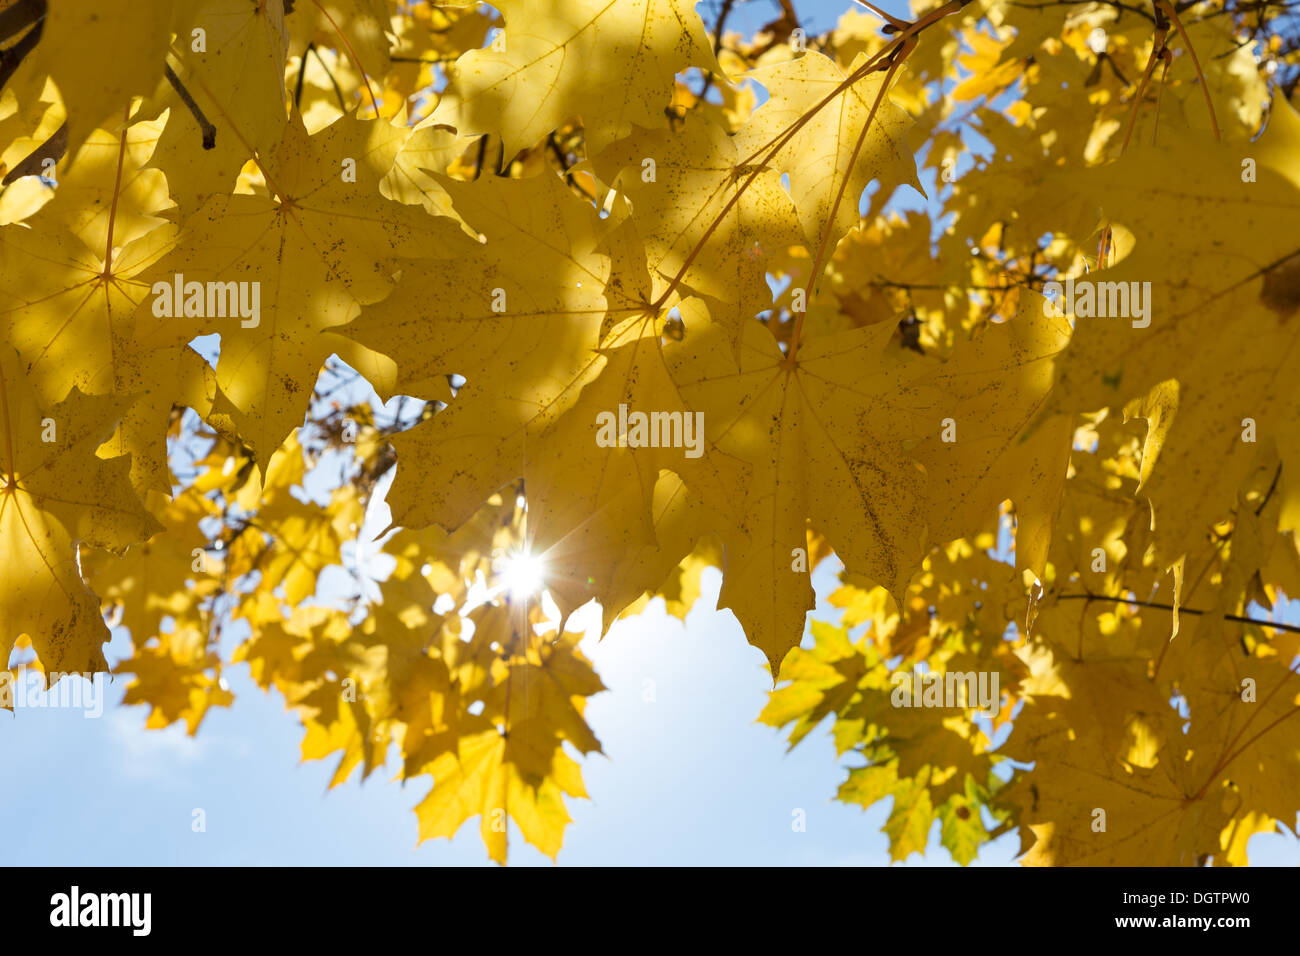 Yellow maple leaves on sky background with shining sun Stock Photo